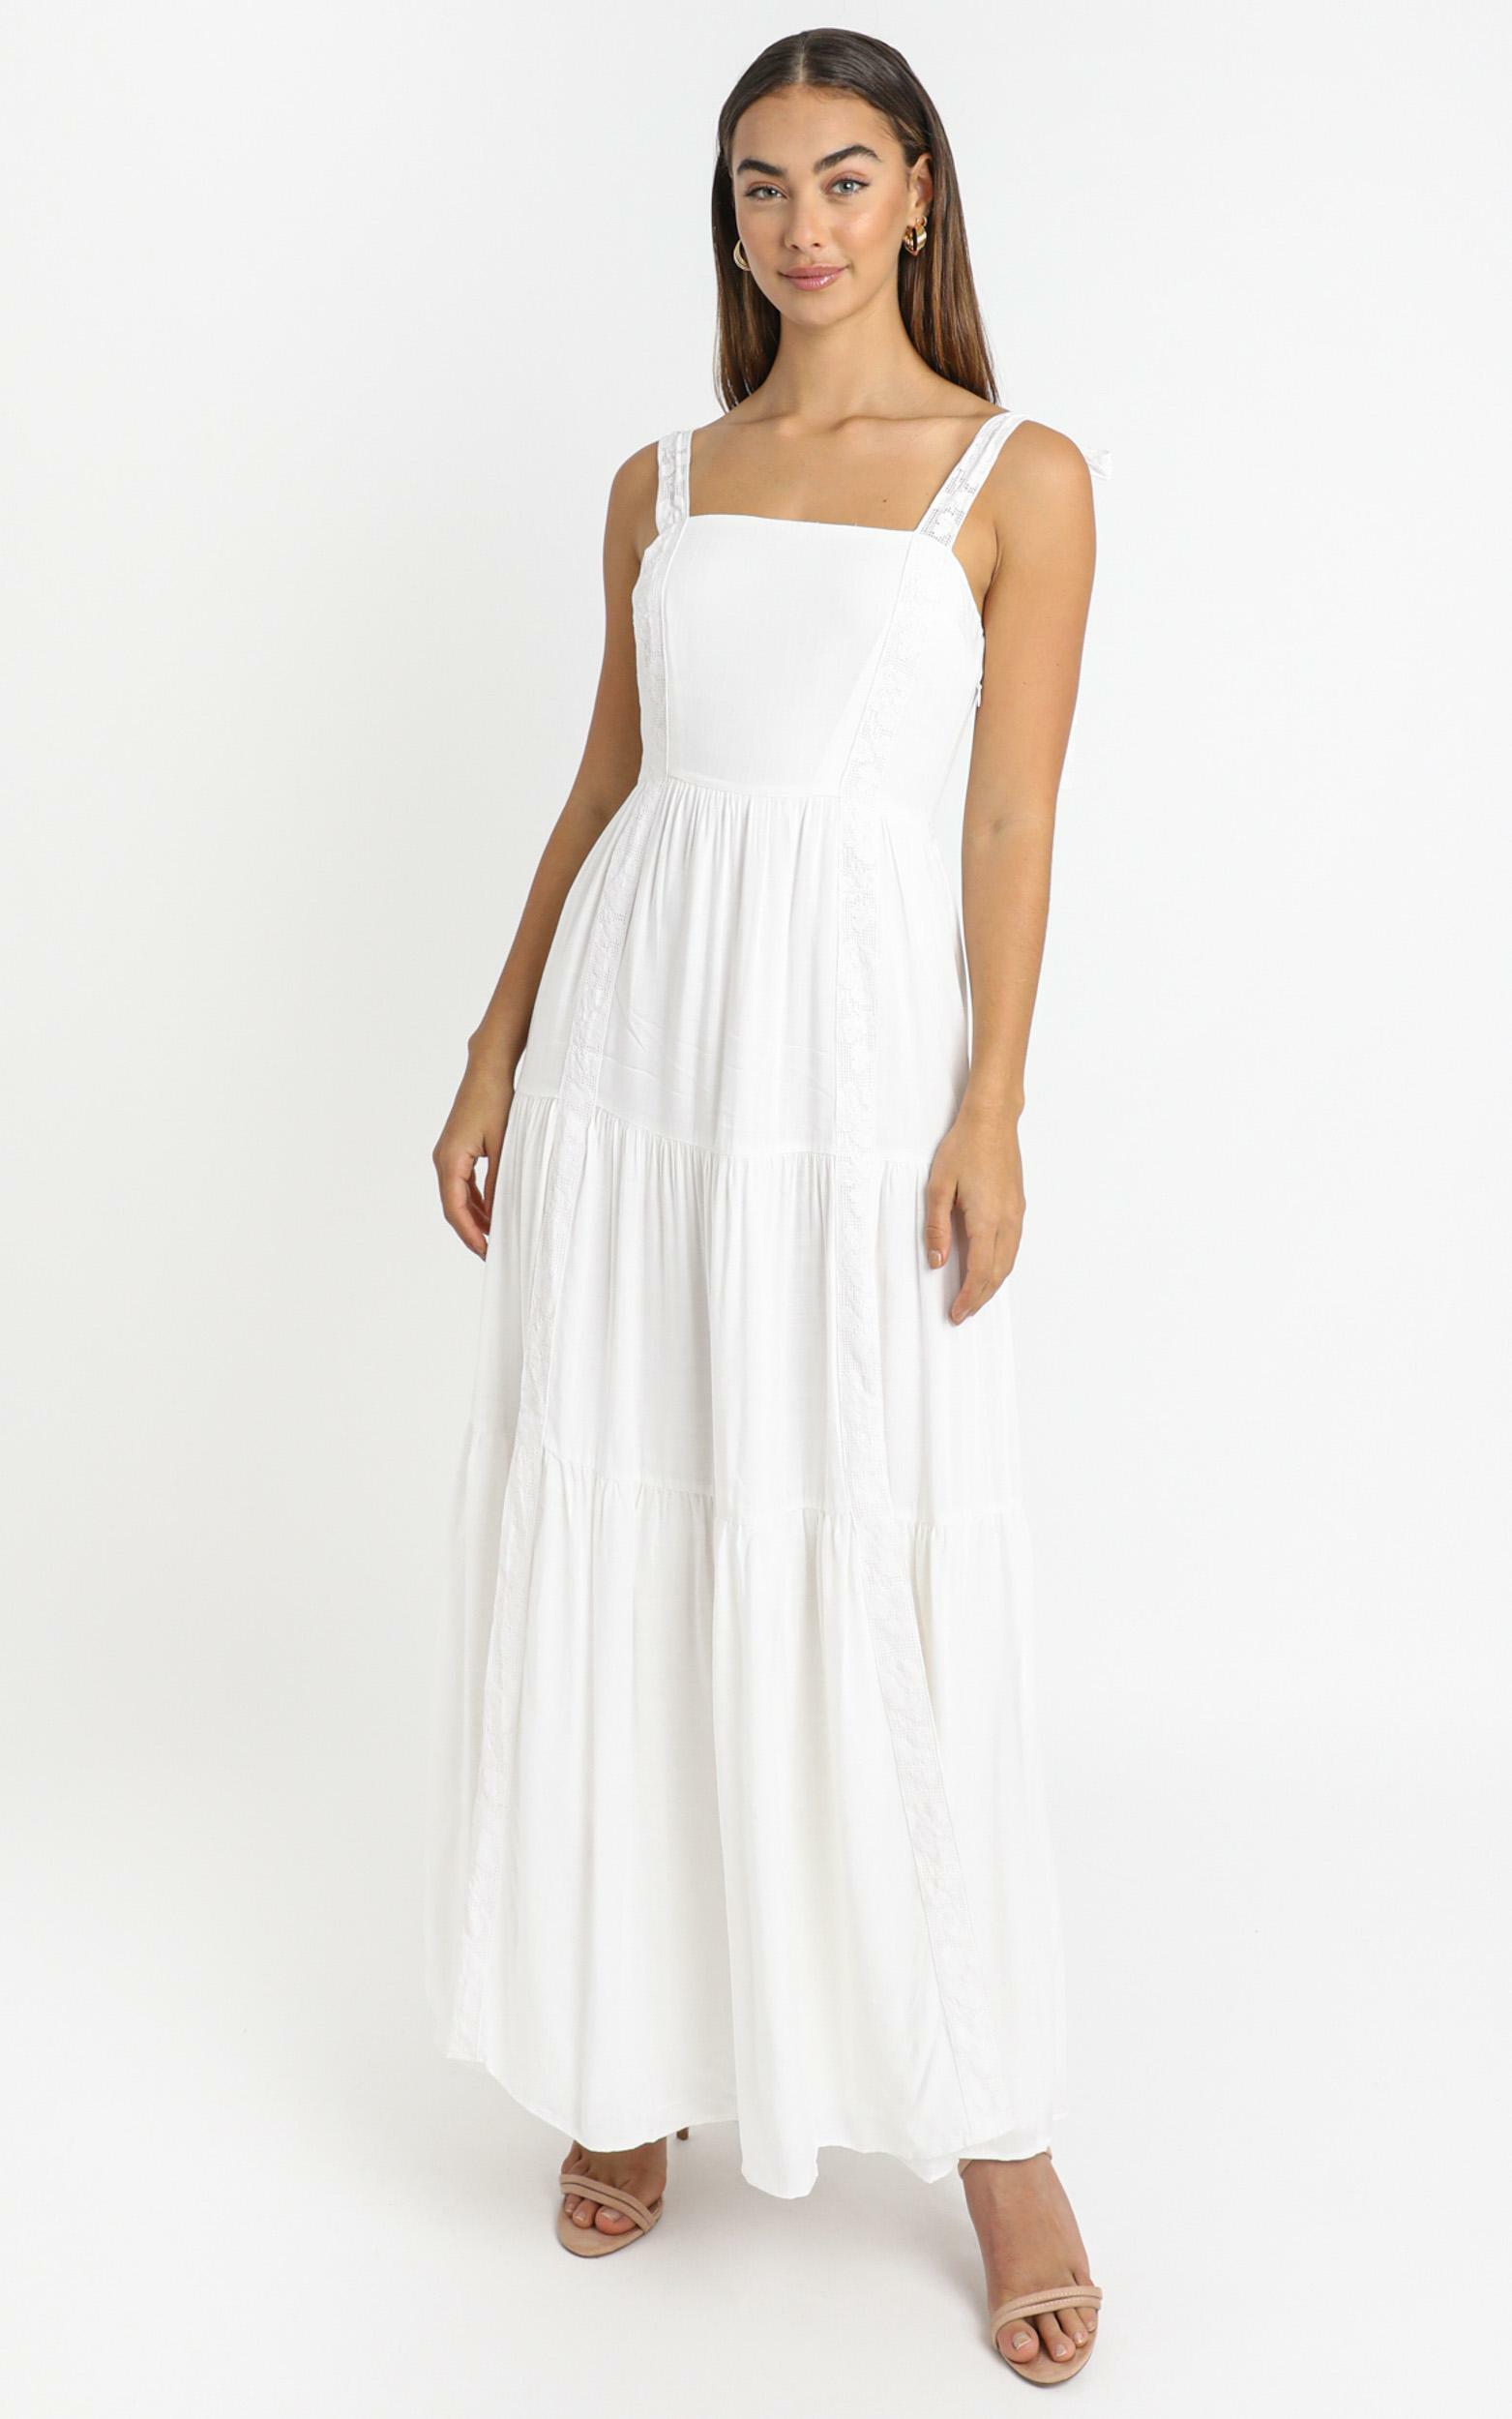 Afternoon Stroll Maxi Dress in White | Showpo